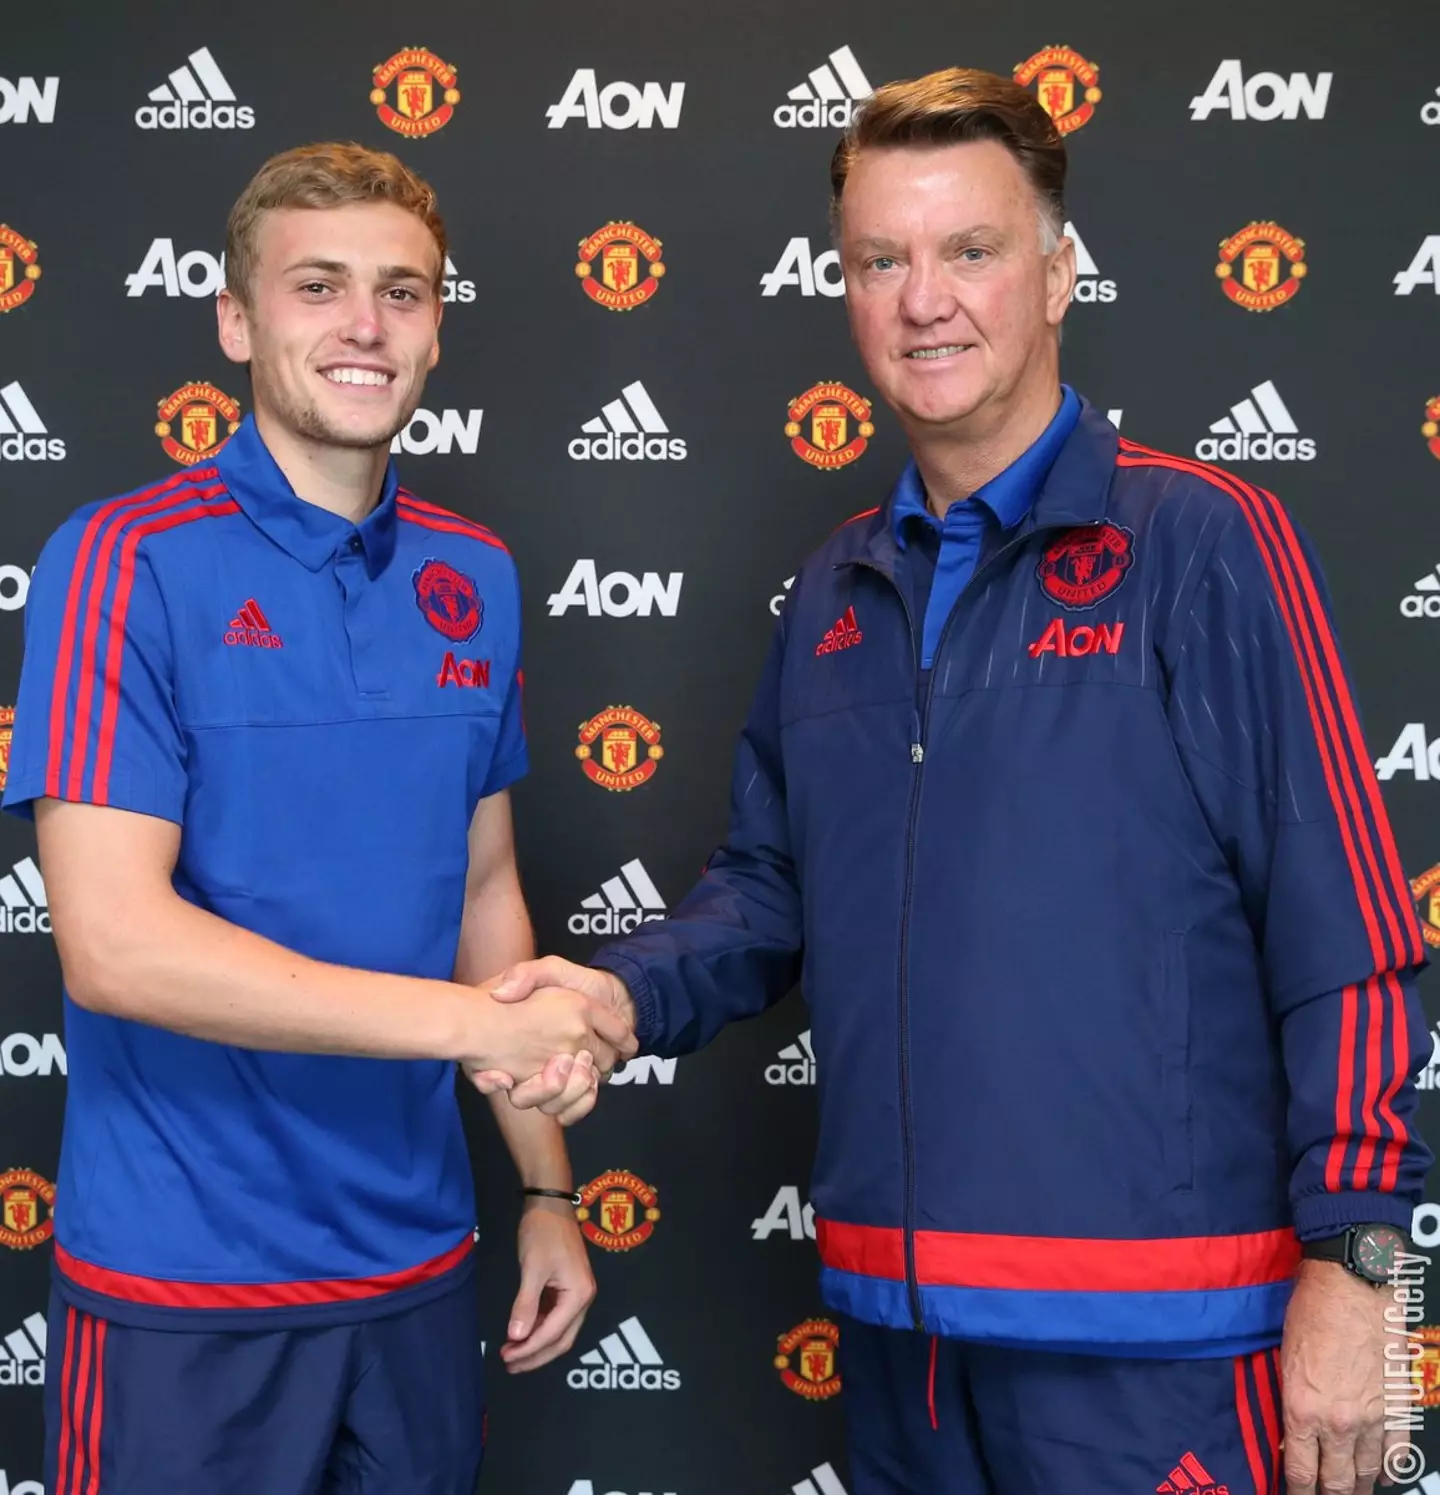 James Wilson signed his first professional contract with Manchester United at 17.